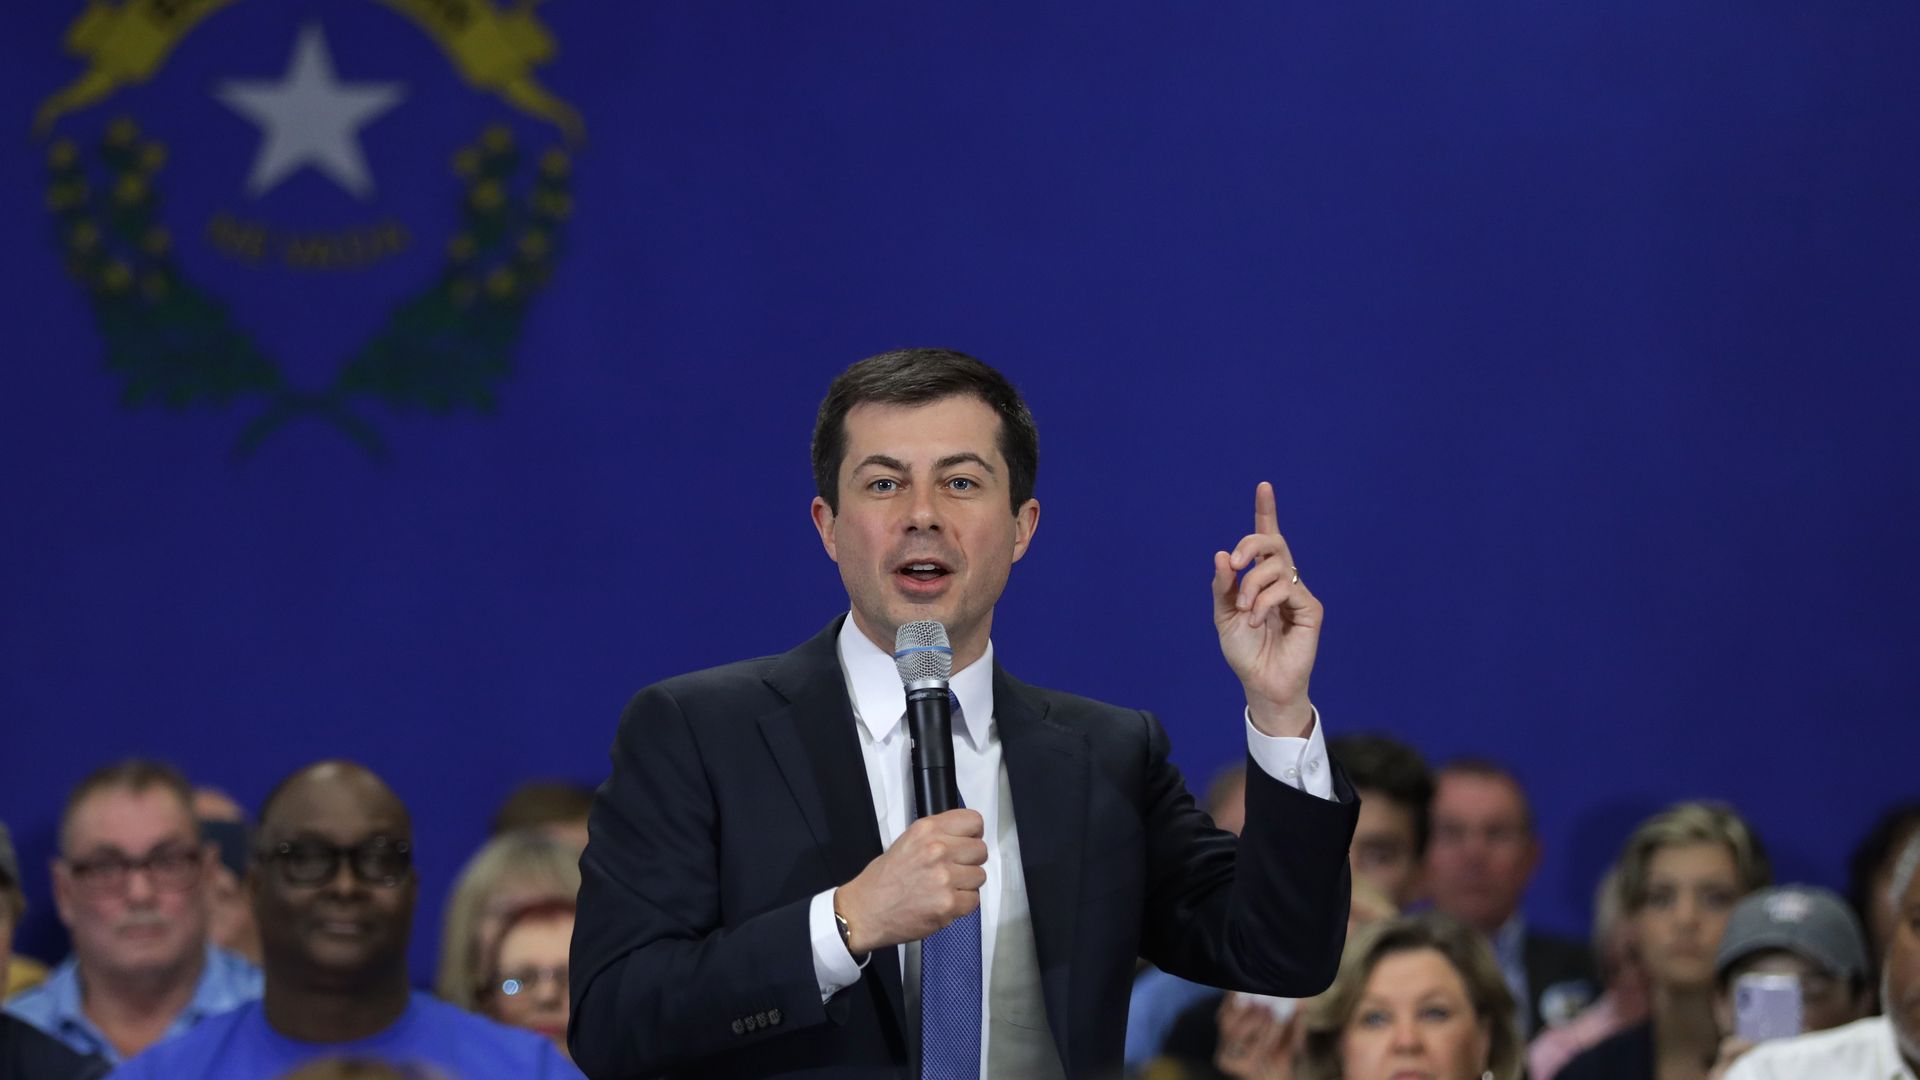 Democratic presidential candidate former South Bend, Indiana Mayor Pete Buttigieg speaks during a campaign town hall event at Durango Hills Community Center February 18, 2020 in Las Vegas